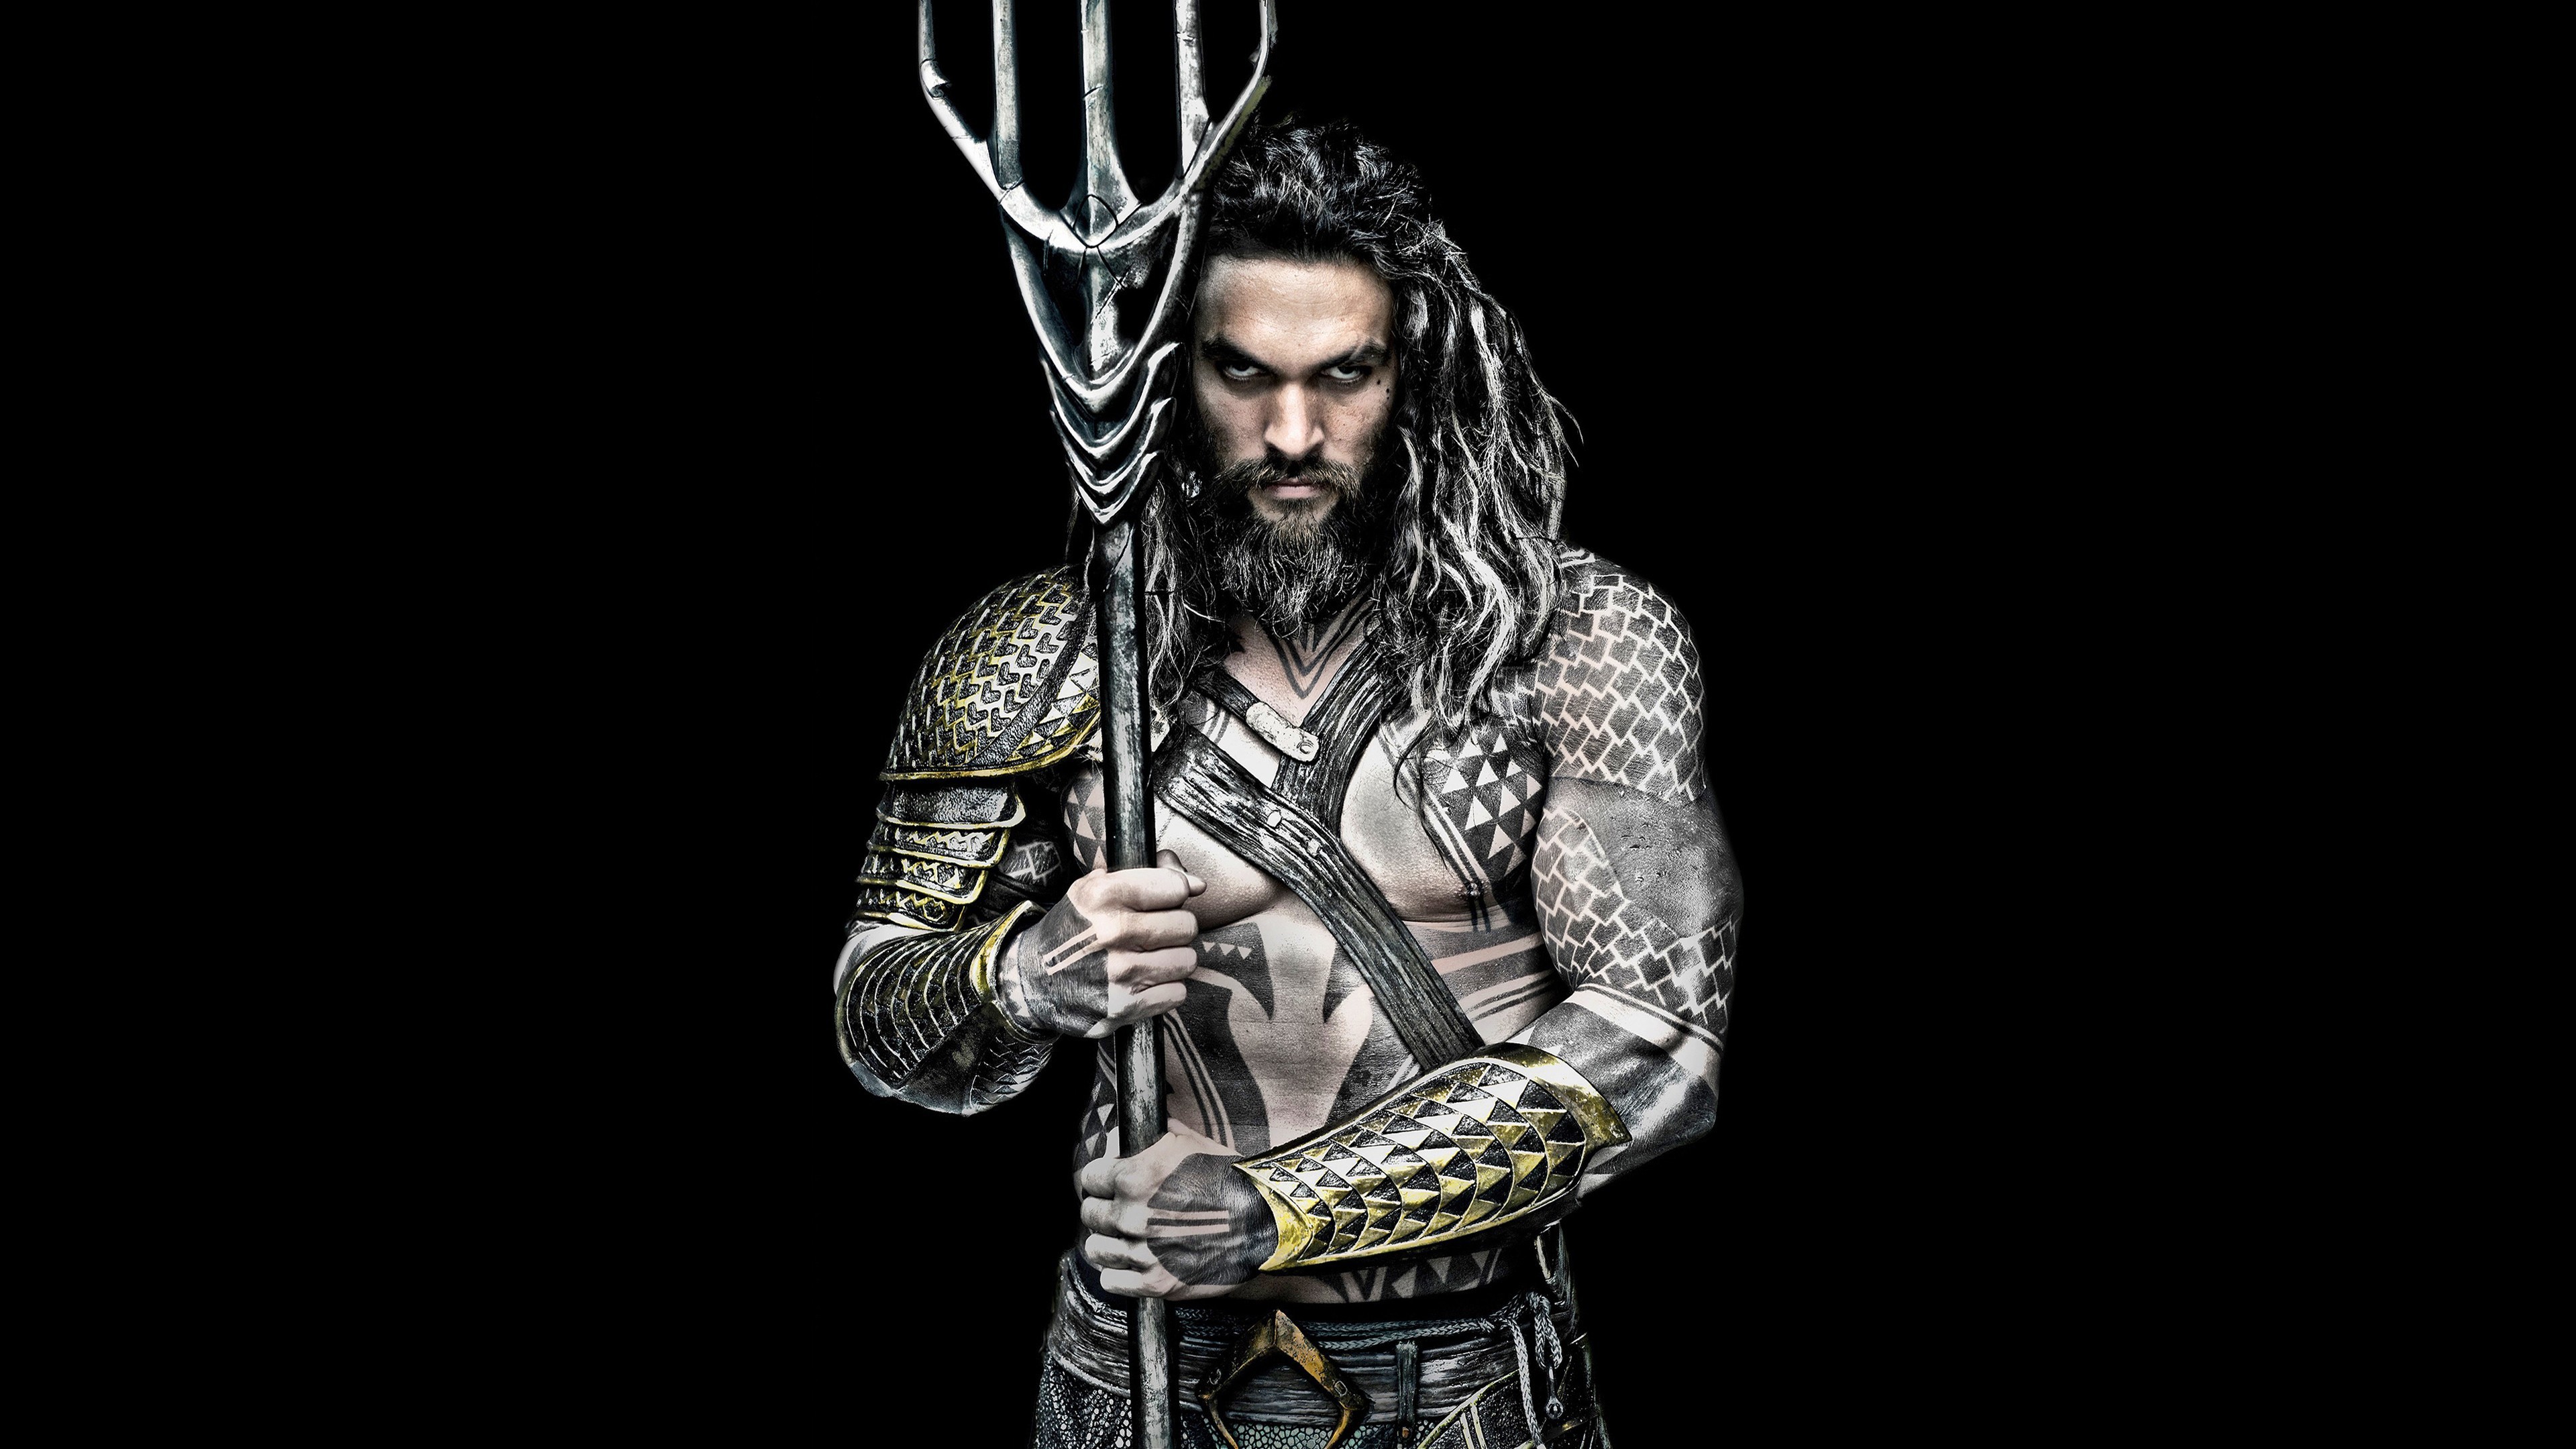 People 3840x2160 Jason Momoa Aquaman Justice League actor movie characters DC Extended Universe movies inked men black background looking at viewer superhero men